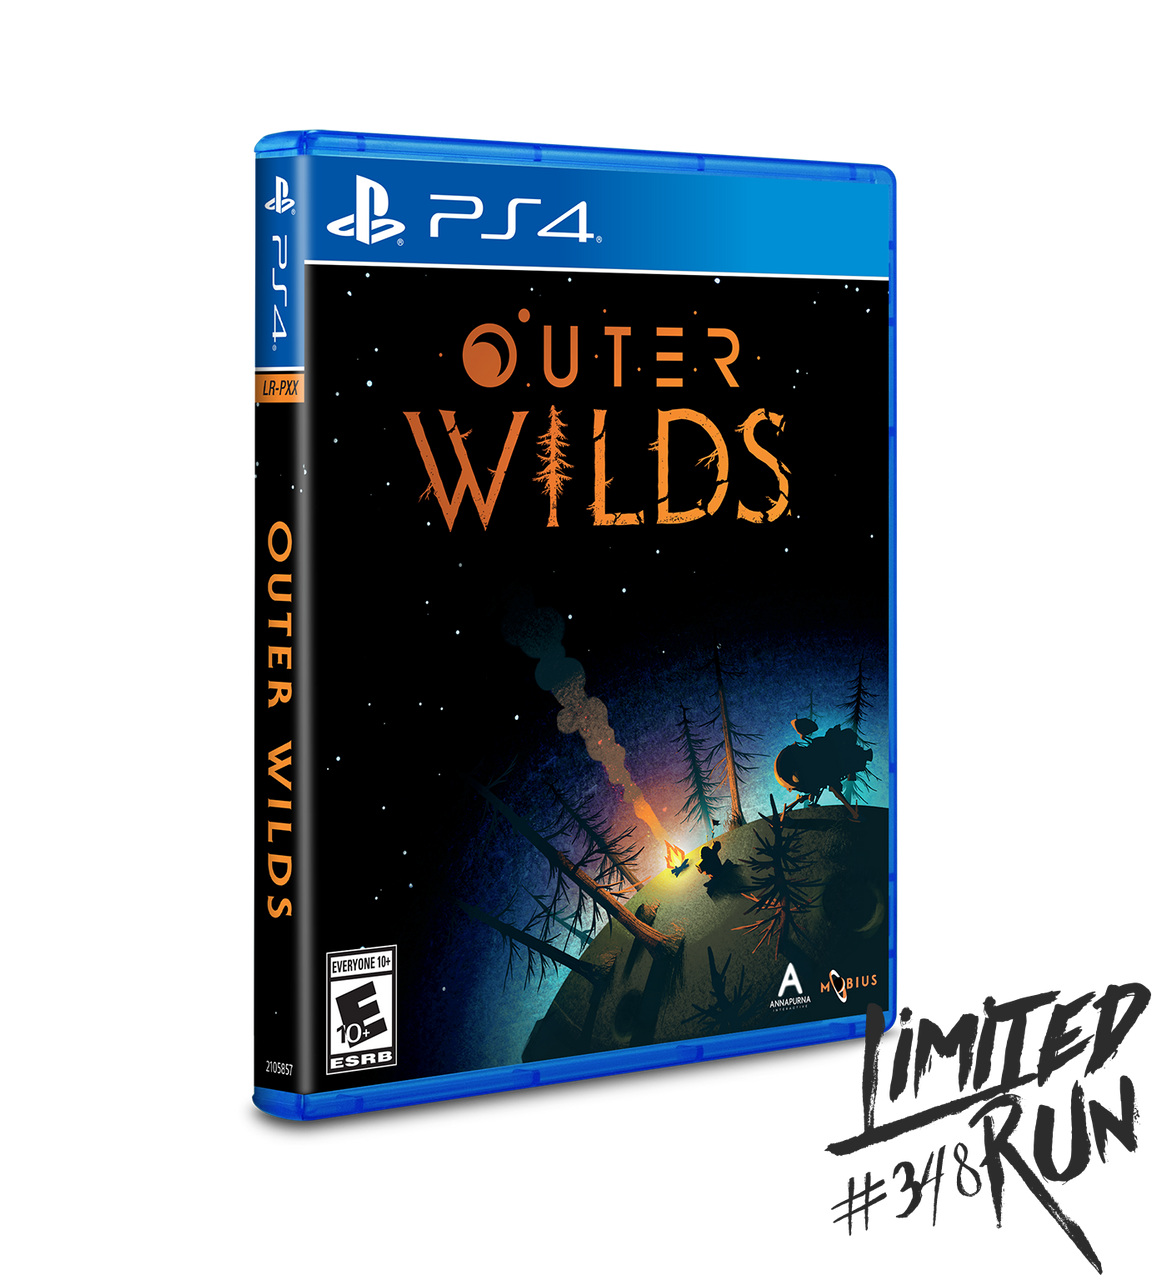 Outer Wilds ps4 диск. Outer Wilds обложка. Outer Wilds ps4 диск Обратная сторона. Outer Wilds отзывы. Wild ps4